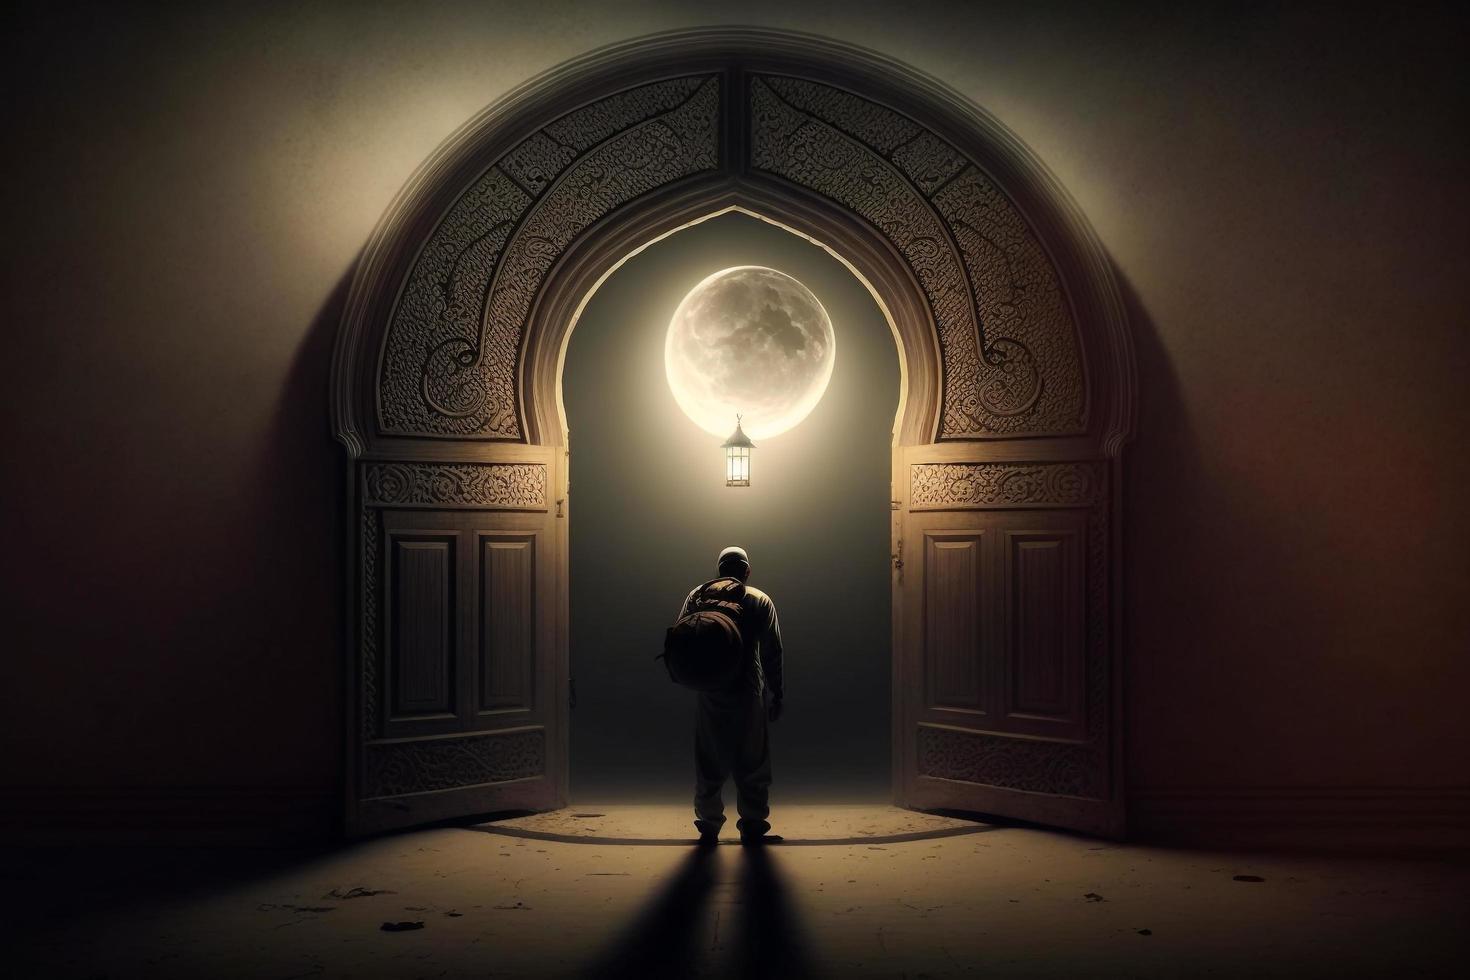 A man stands in front of a moon in a dark mosque door photo